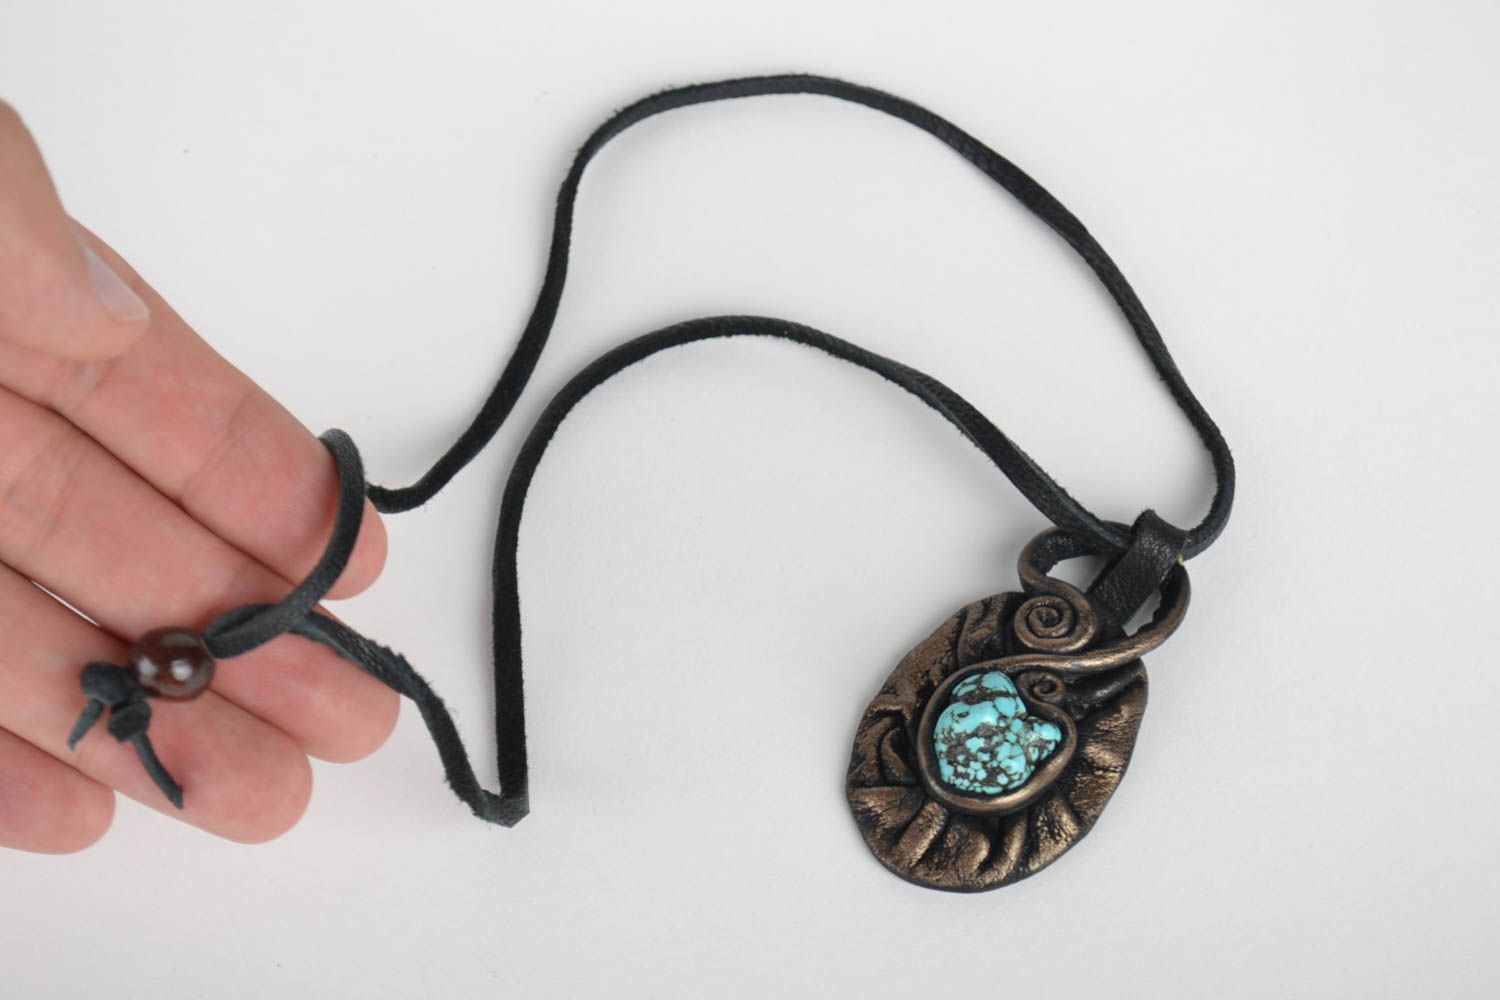 Necklace made of leather with turquoise pendant handmade leather jewelry photo 5